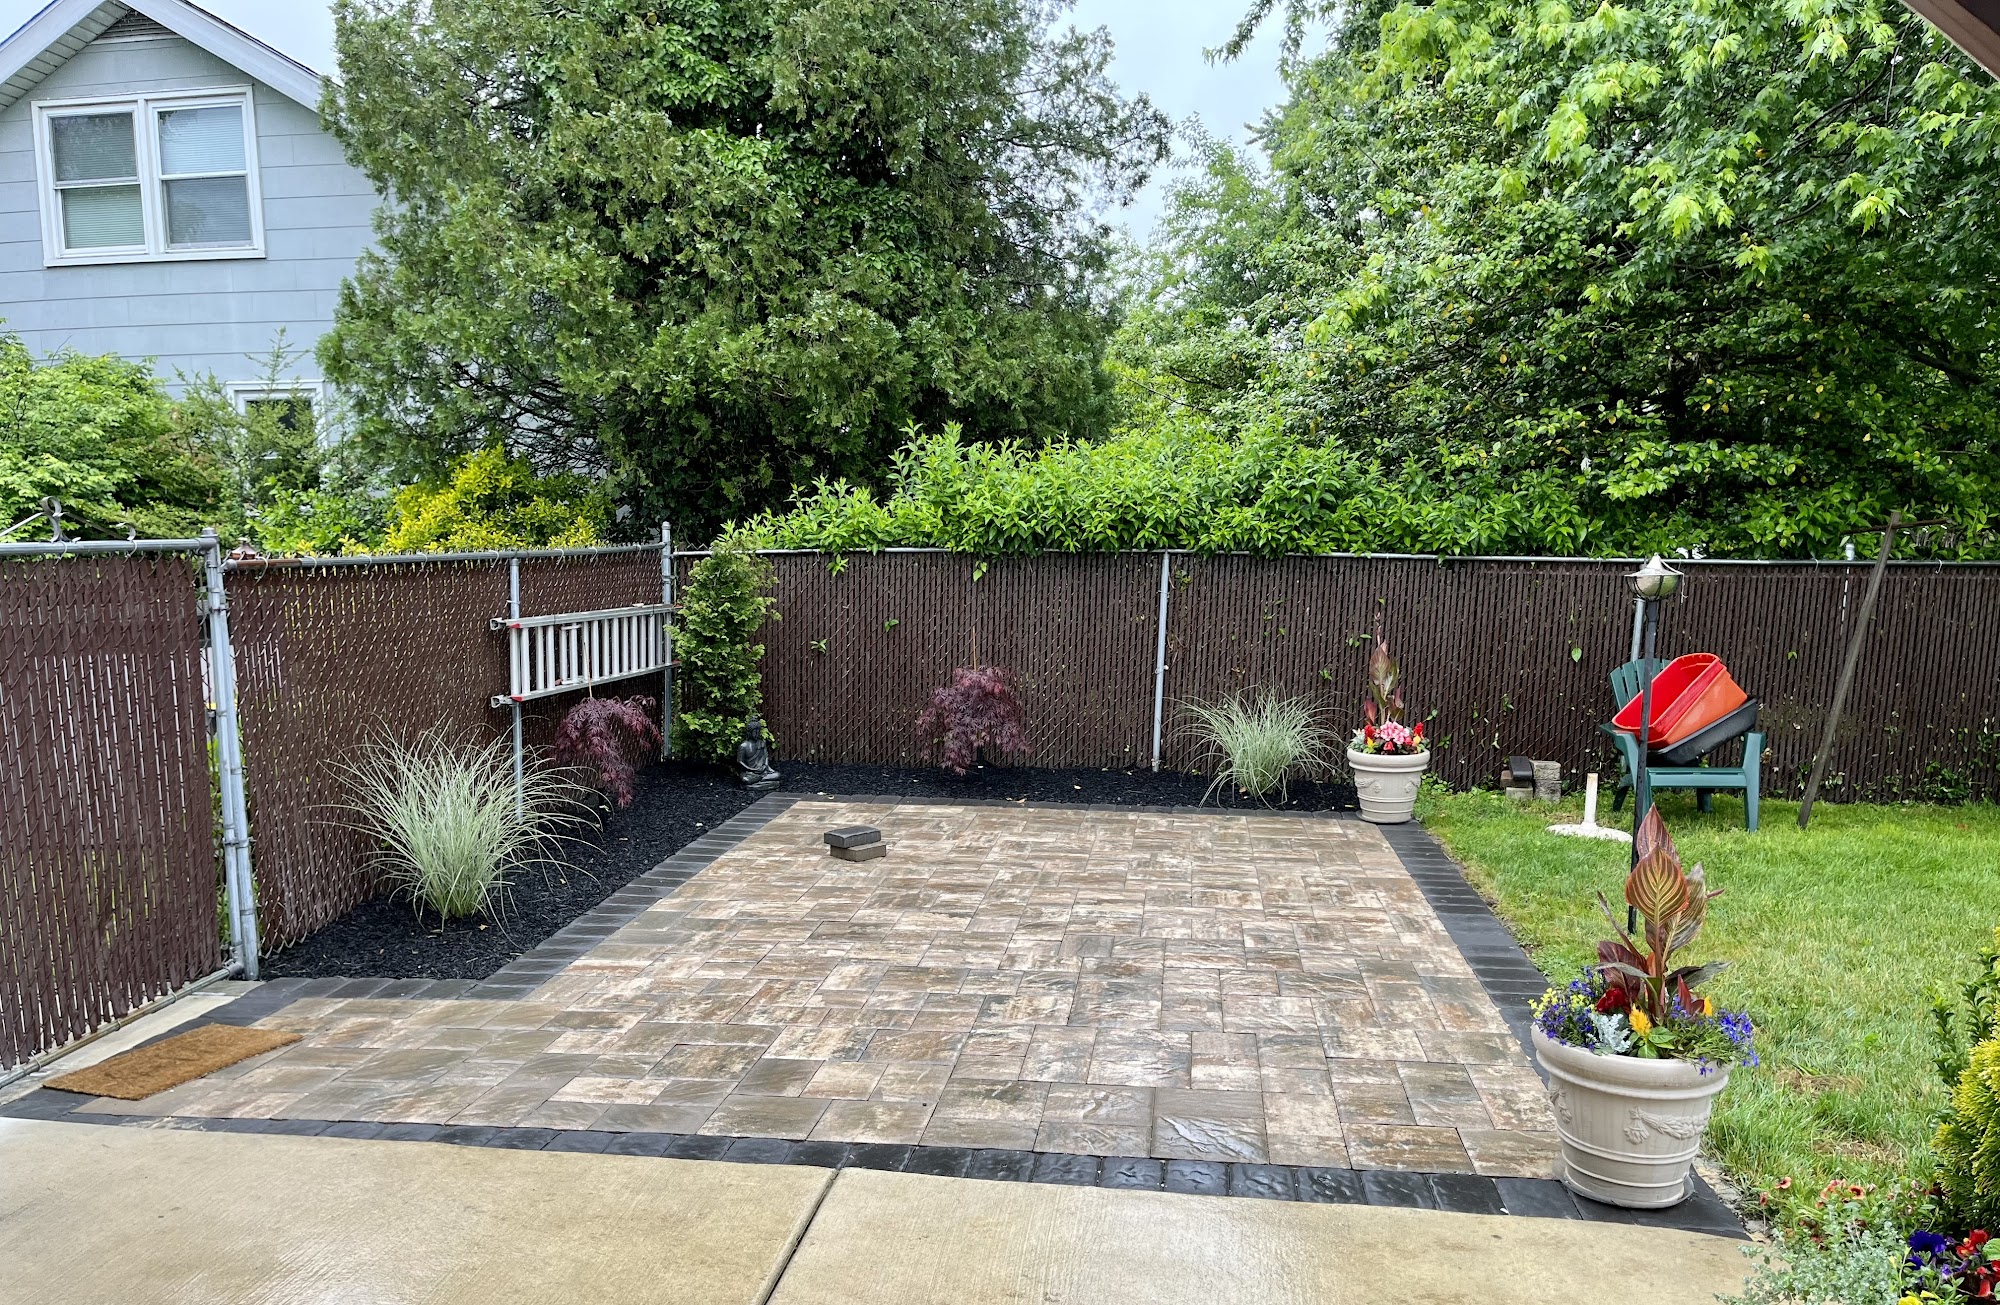 Mike's Hardscapes 708 Creek Rd, Bellmawr New Jersey 08031